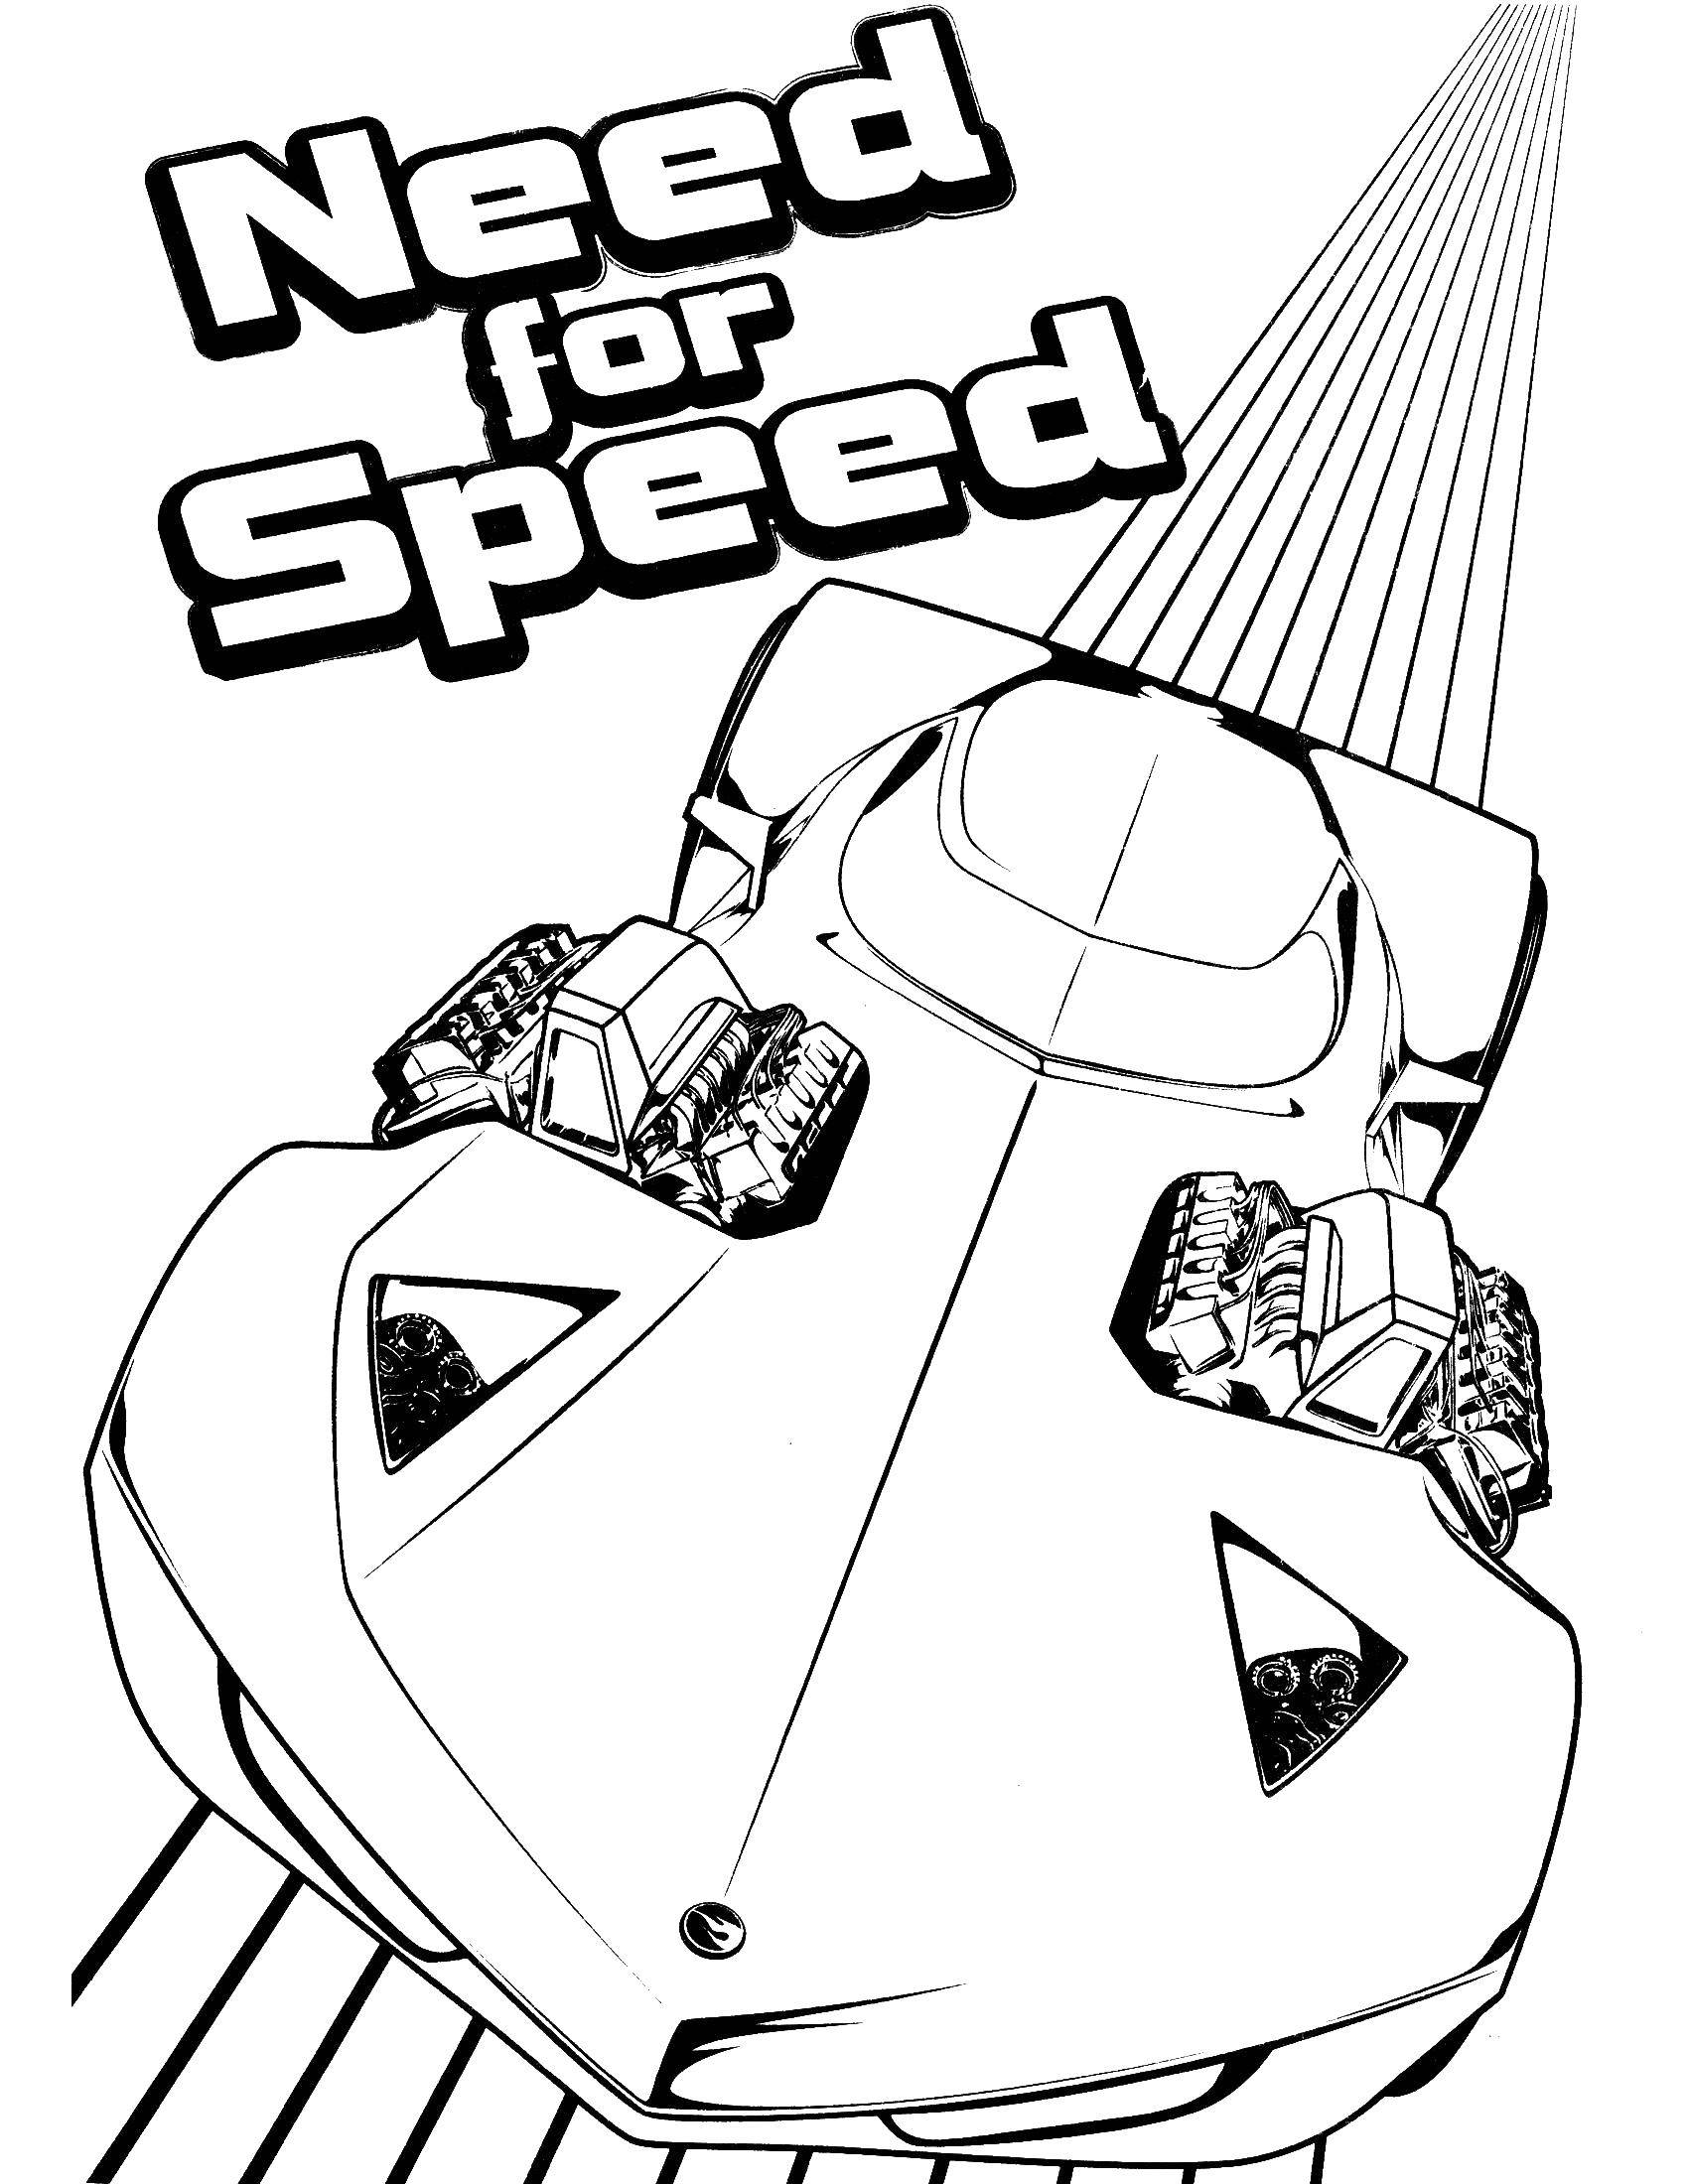 Coloring Machine and speed. Category coloring. Tags:  car, racing, speed.